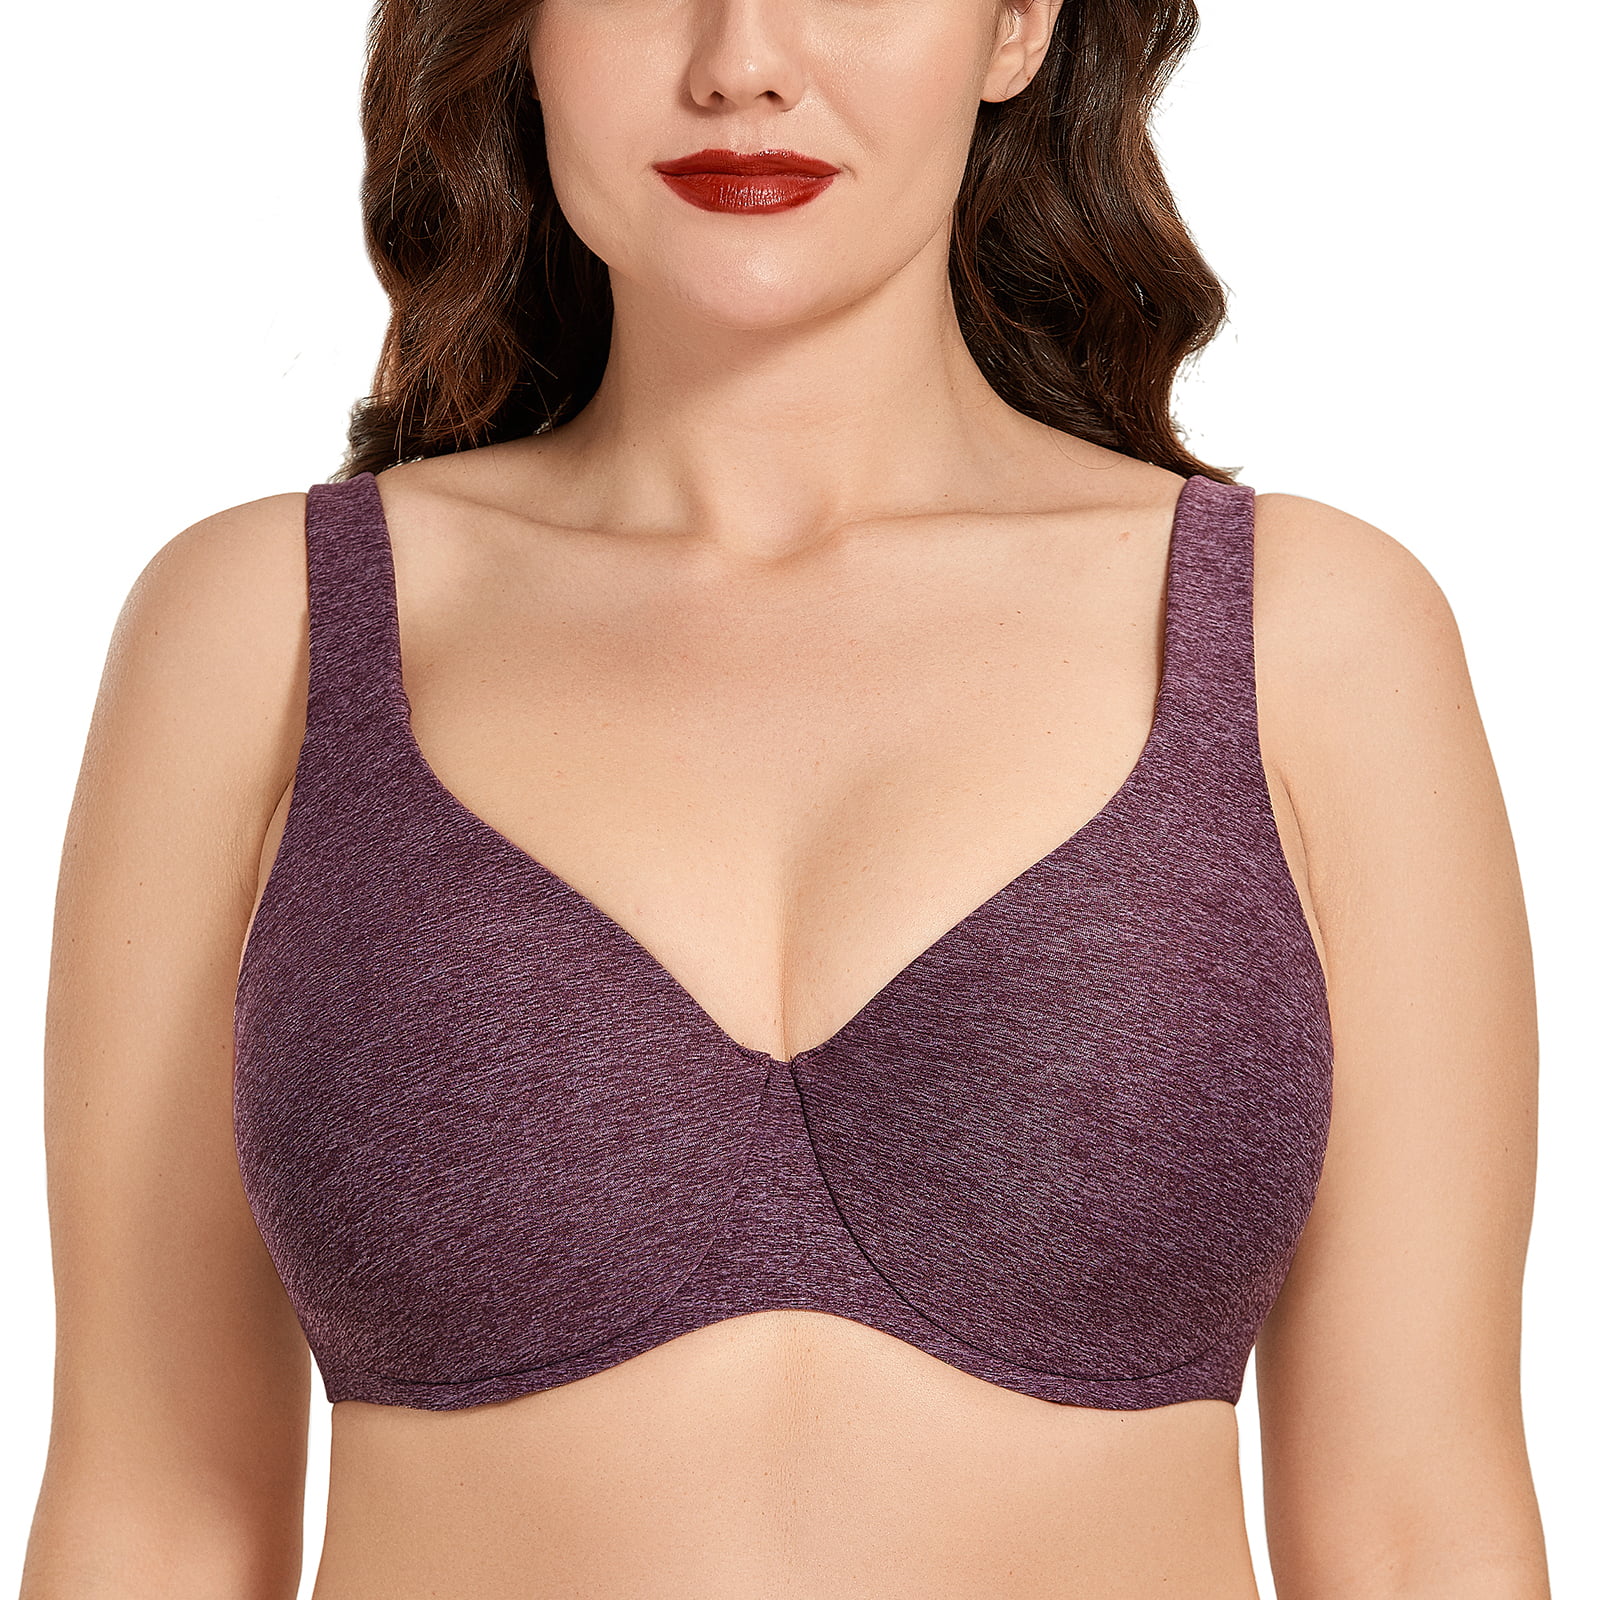 DELIMIRA Womens Plus Size Bras Minimizer Seamless Underwire Unlined Cup